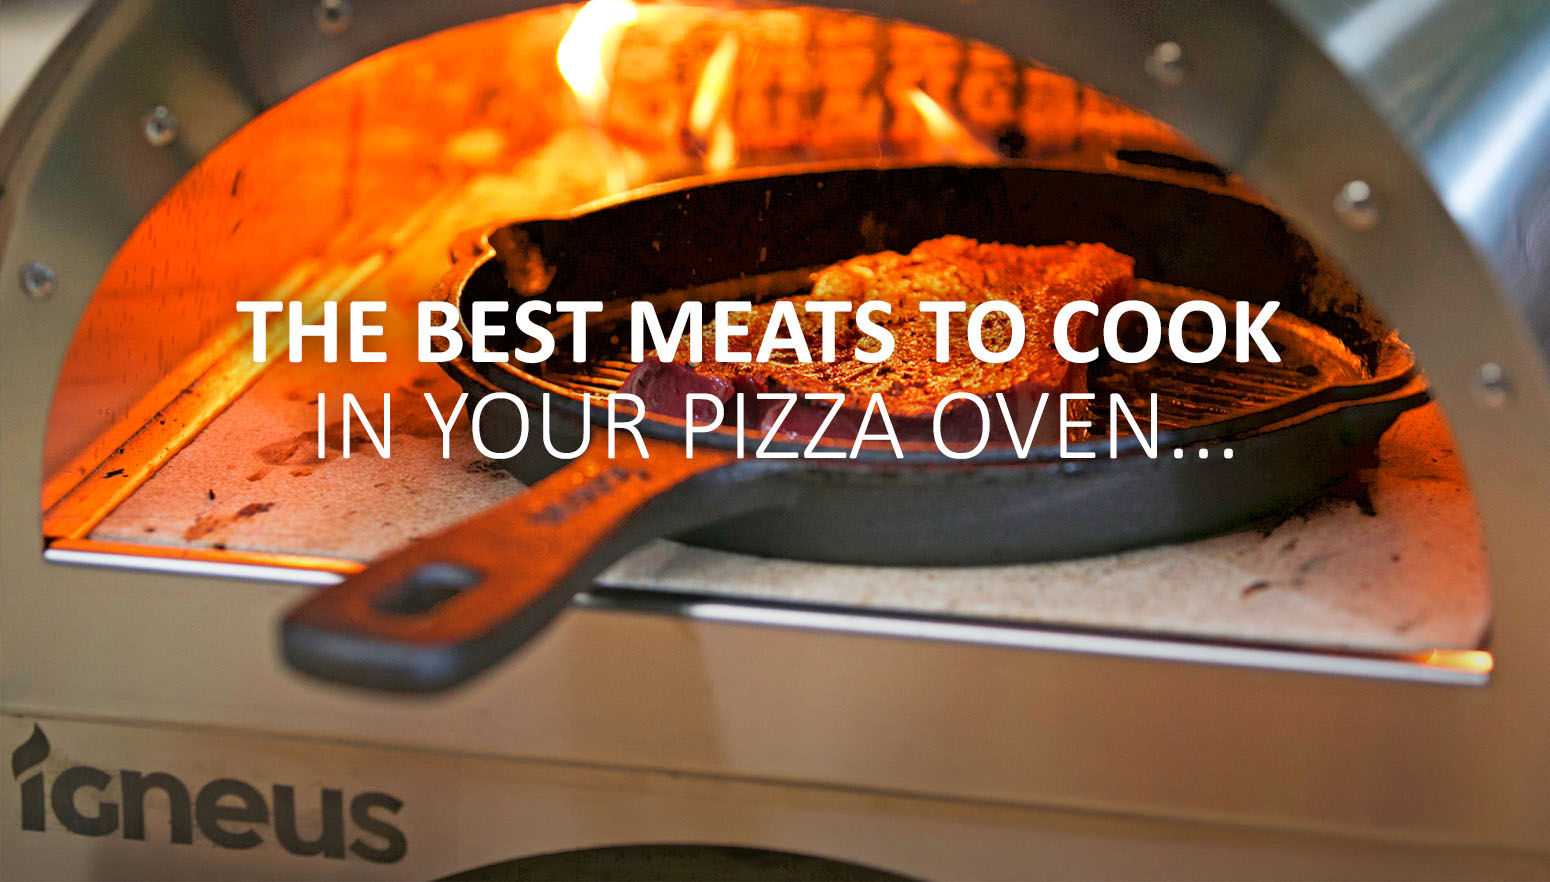 The best meats to cook in your pizza oven - igneus wood fired pizza ovens uk